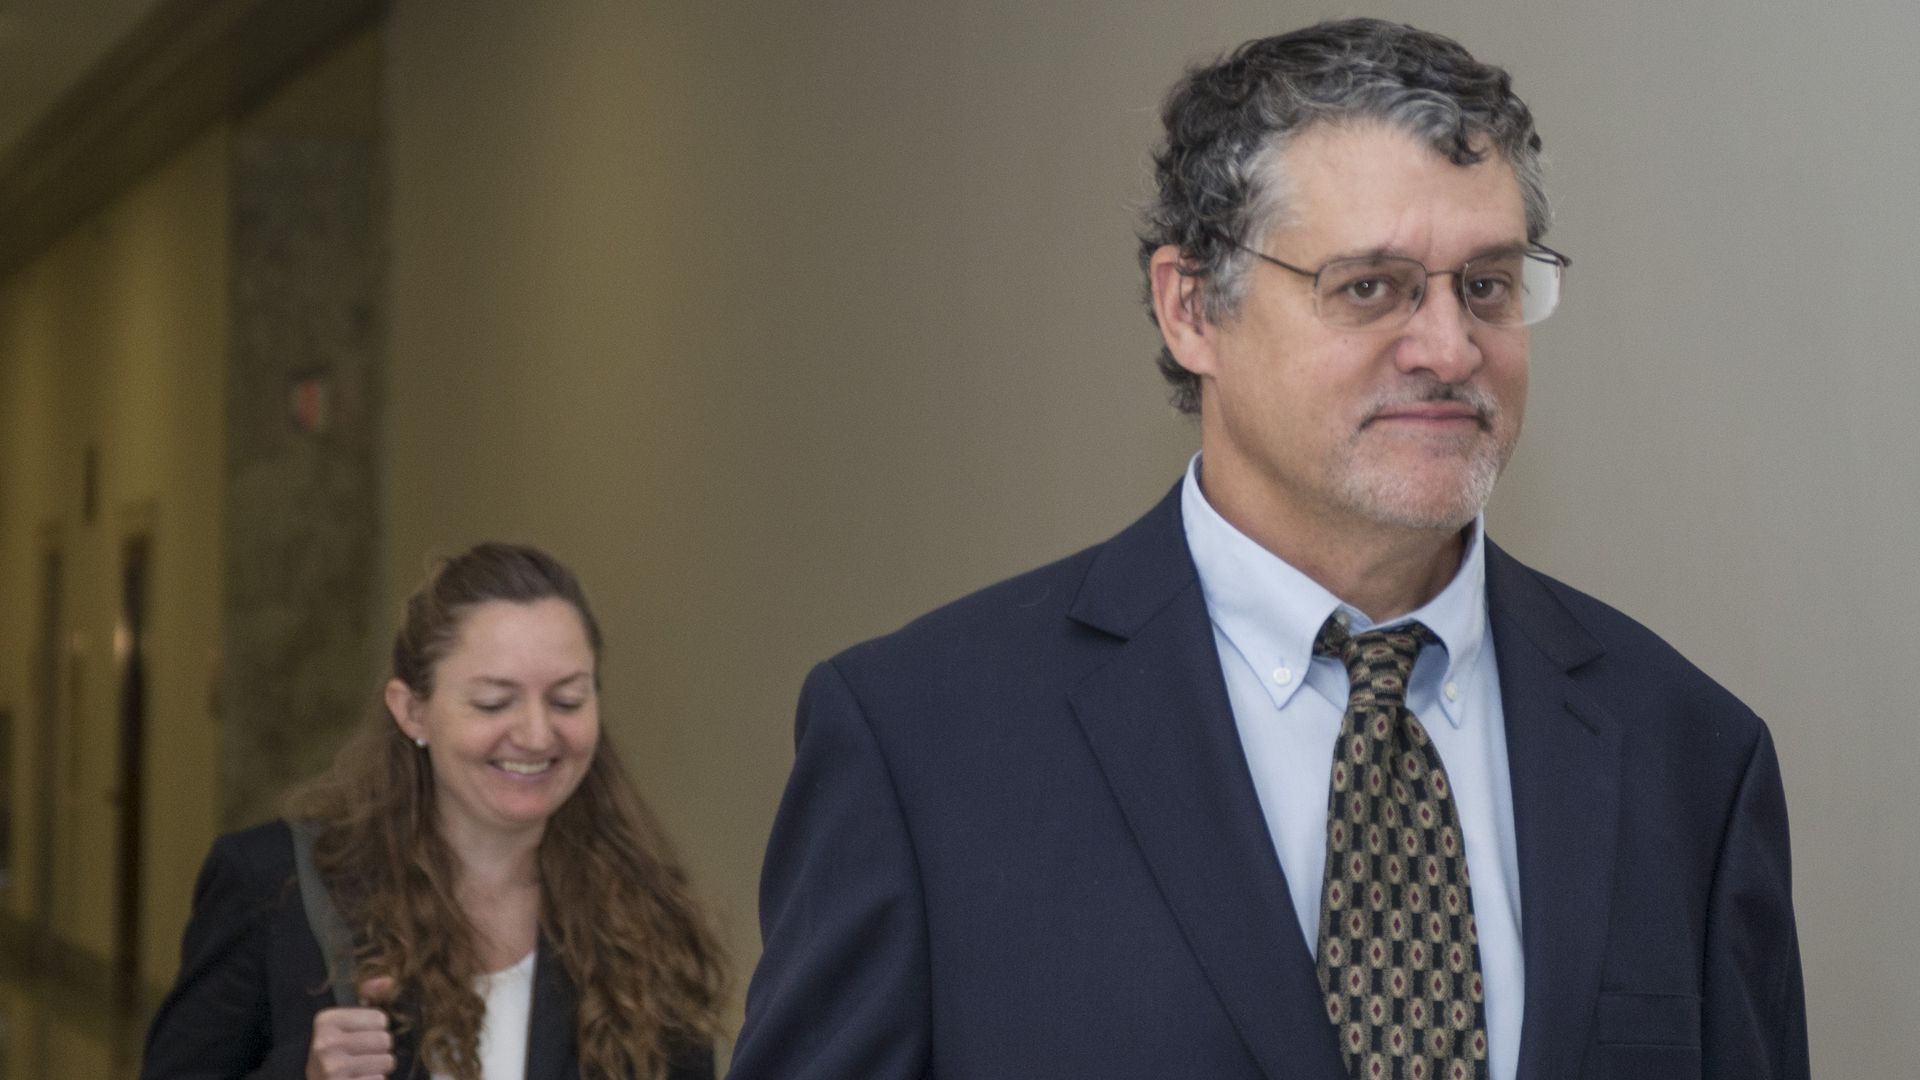 Glenn Simpson looks at the camera as he walks into a hearing. 